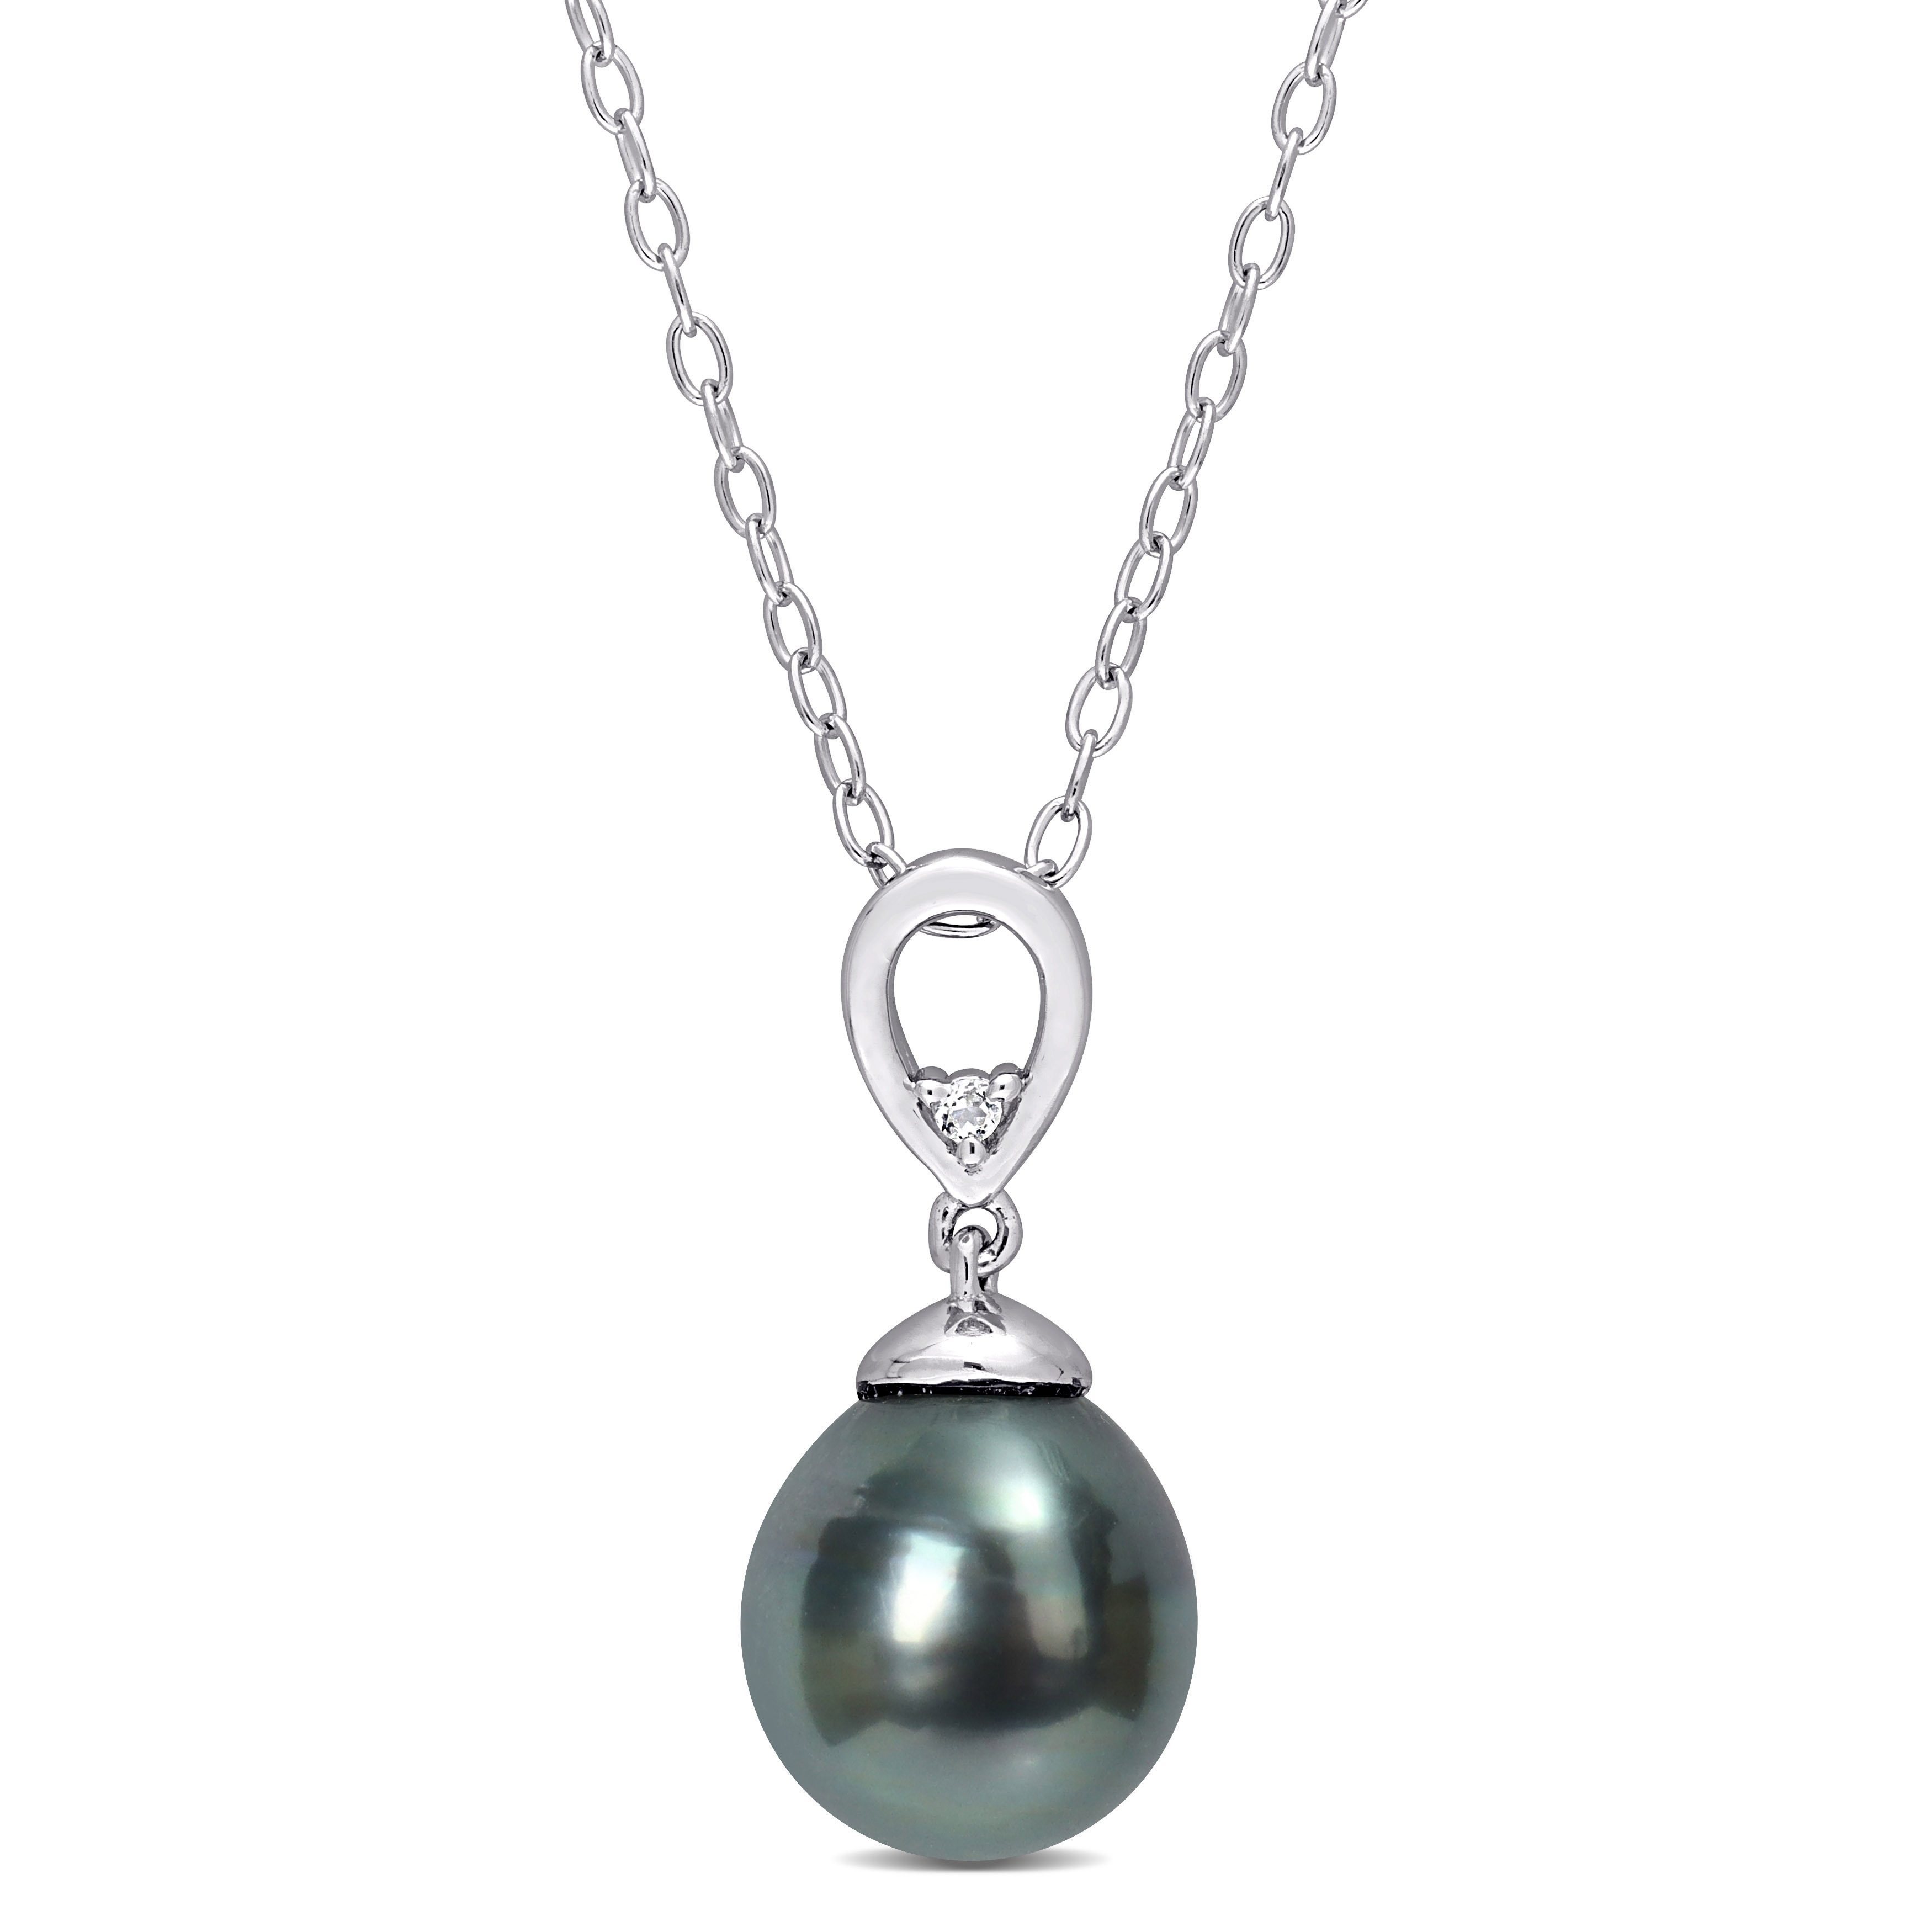 8-9 MM Black Tahitian Cultured Pearl and White Topaz Drop Pendant with Chain in Sterling Silver - 18 in.